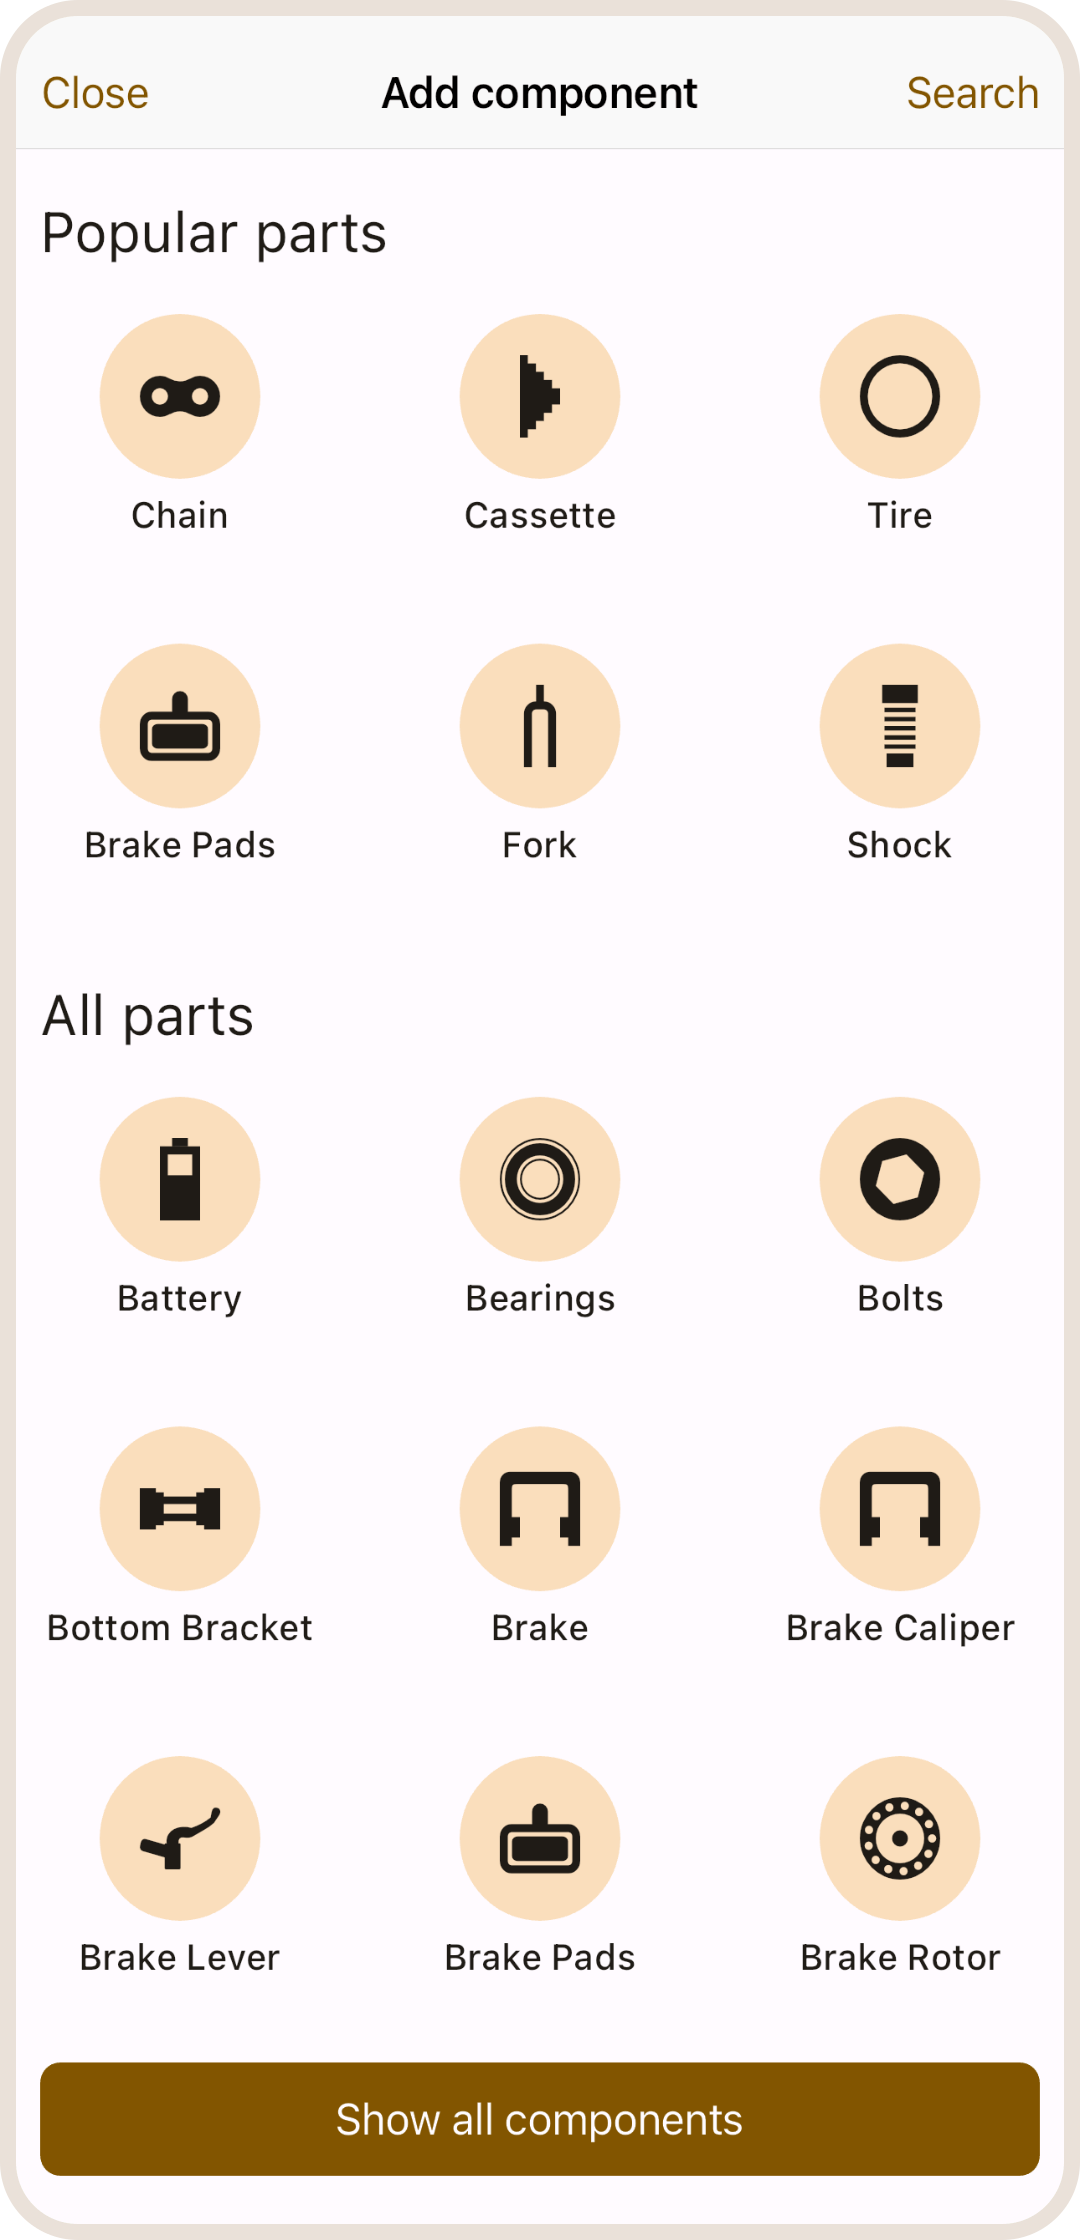 Components catalog in ProBikeGarage app